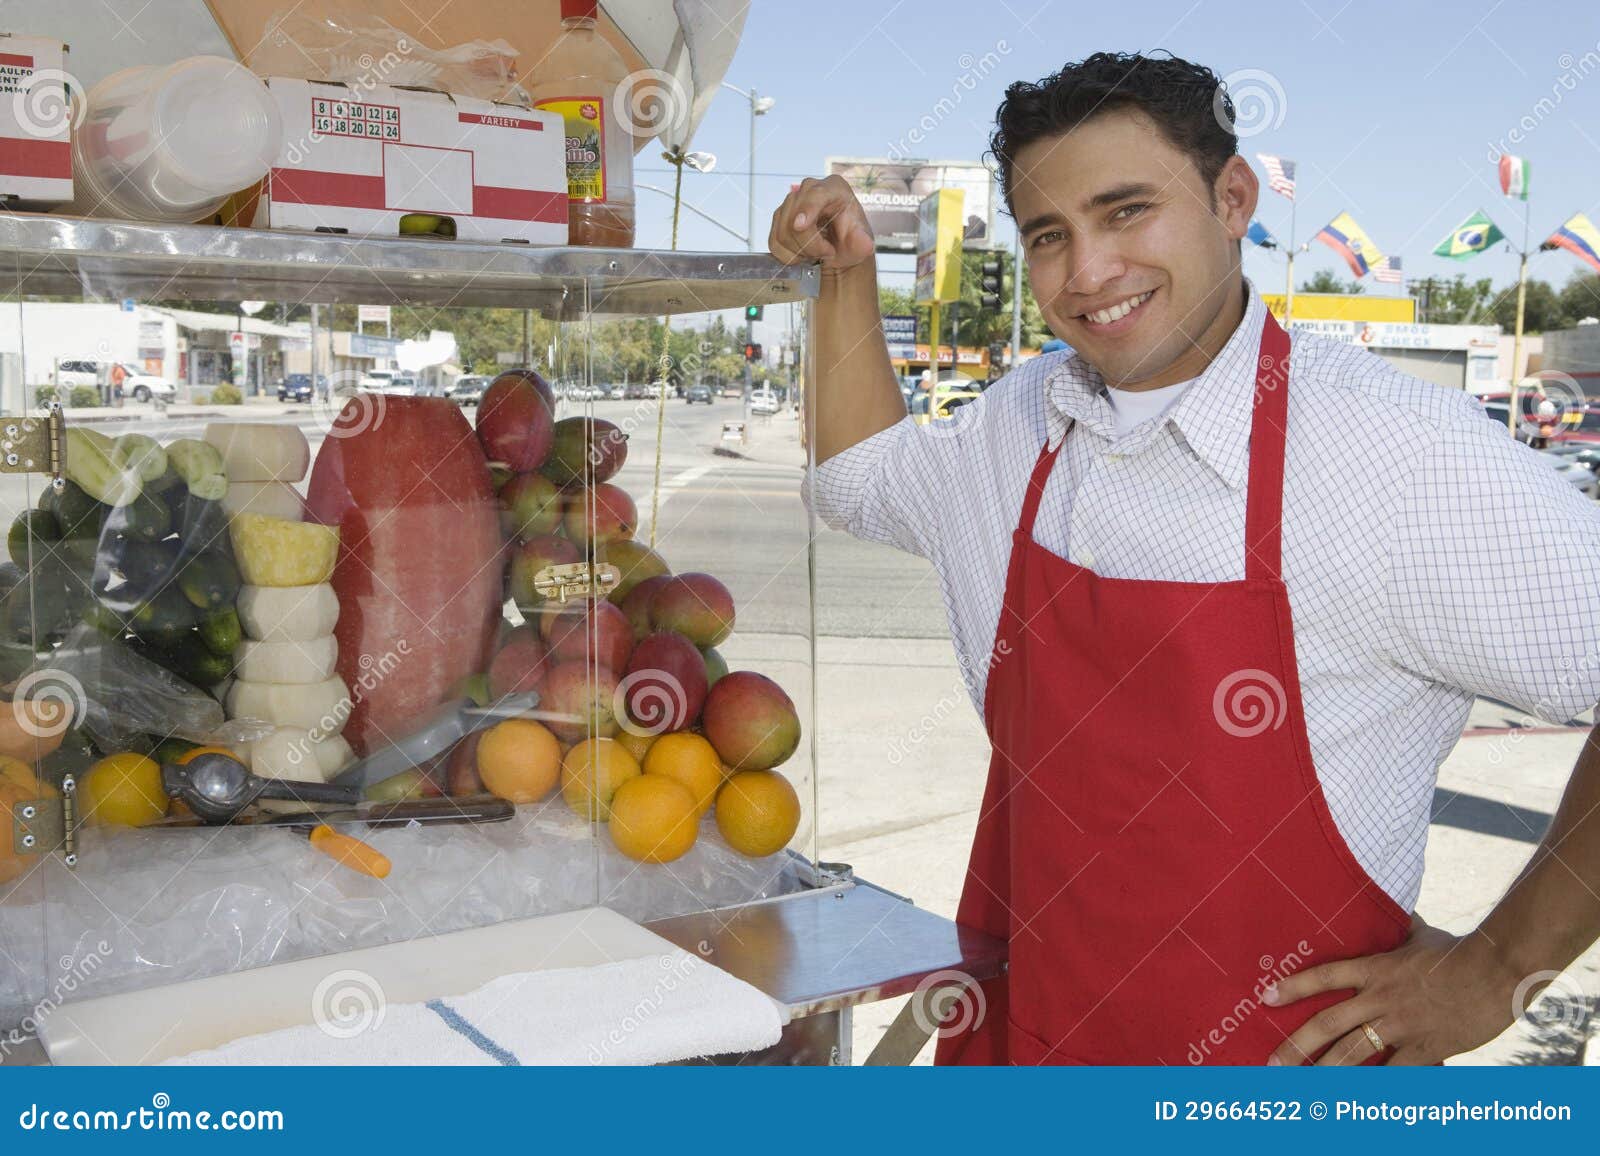 street vendor standing by stall